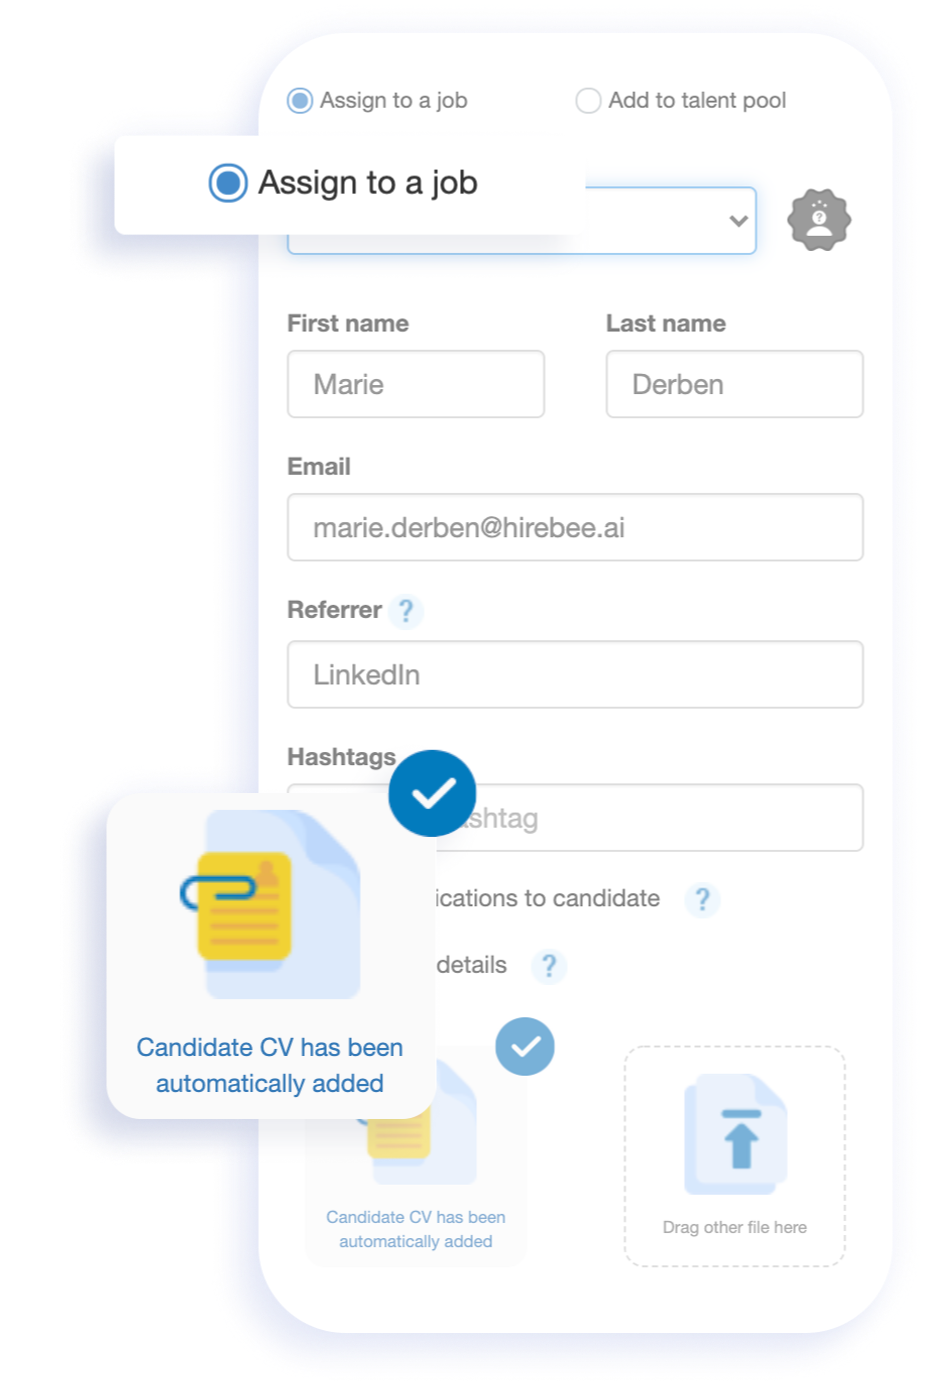 Candidate sourcing is a key part of talent acquisition. That is why Hirebee provides you with a complete toolset to find the best candidates, create multiple pipelines, build a talent pool and source like a ninja.